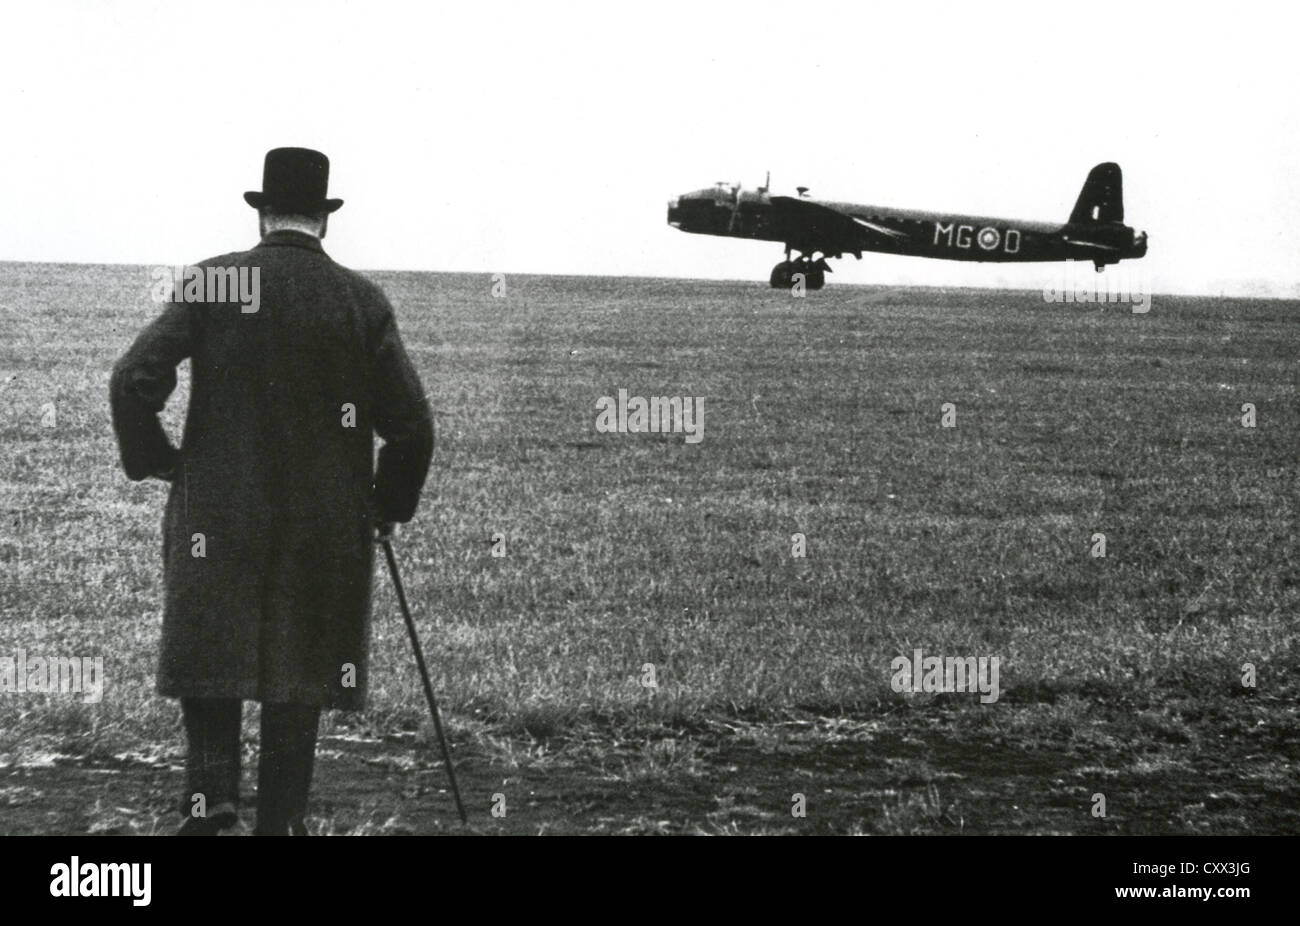 WINSTON CHURCHILL (1874-1965)  watches a Short Stirling of RAF 7 Squadron taking off on 6 June 1941 at Oakington, Cambridgeshire Stock Photo